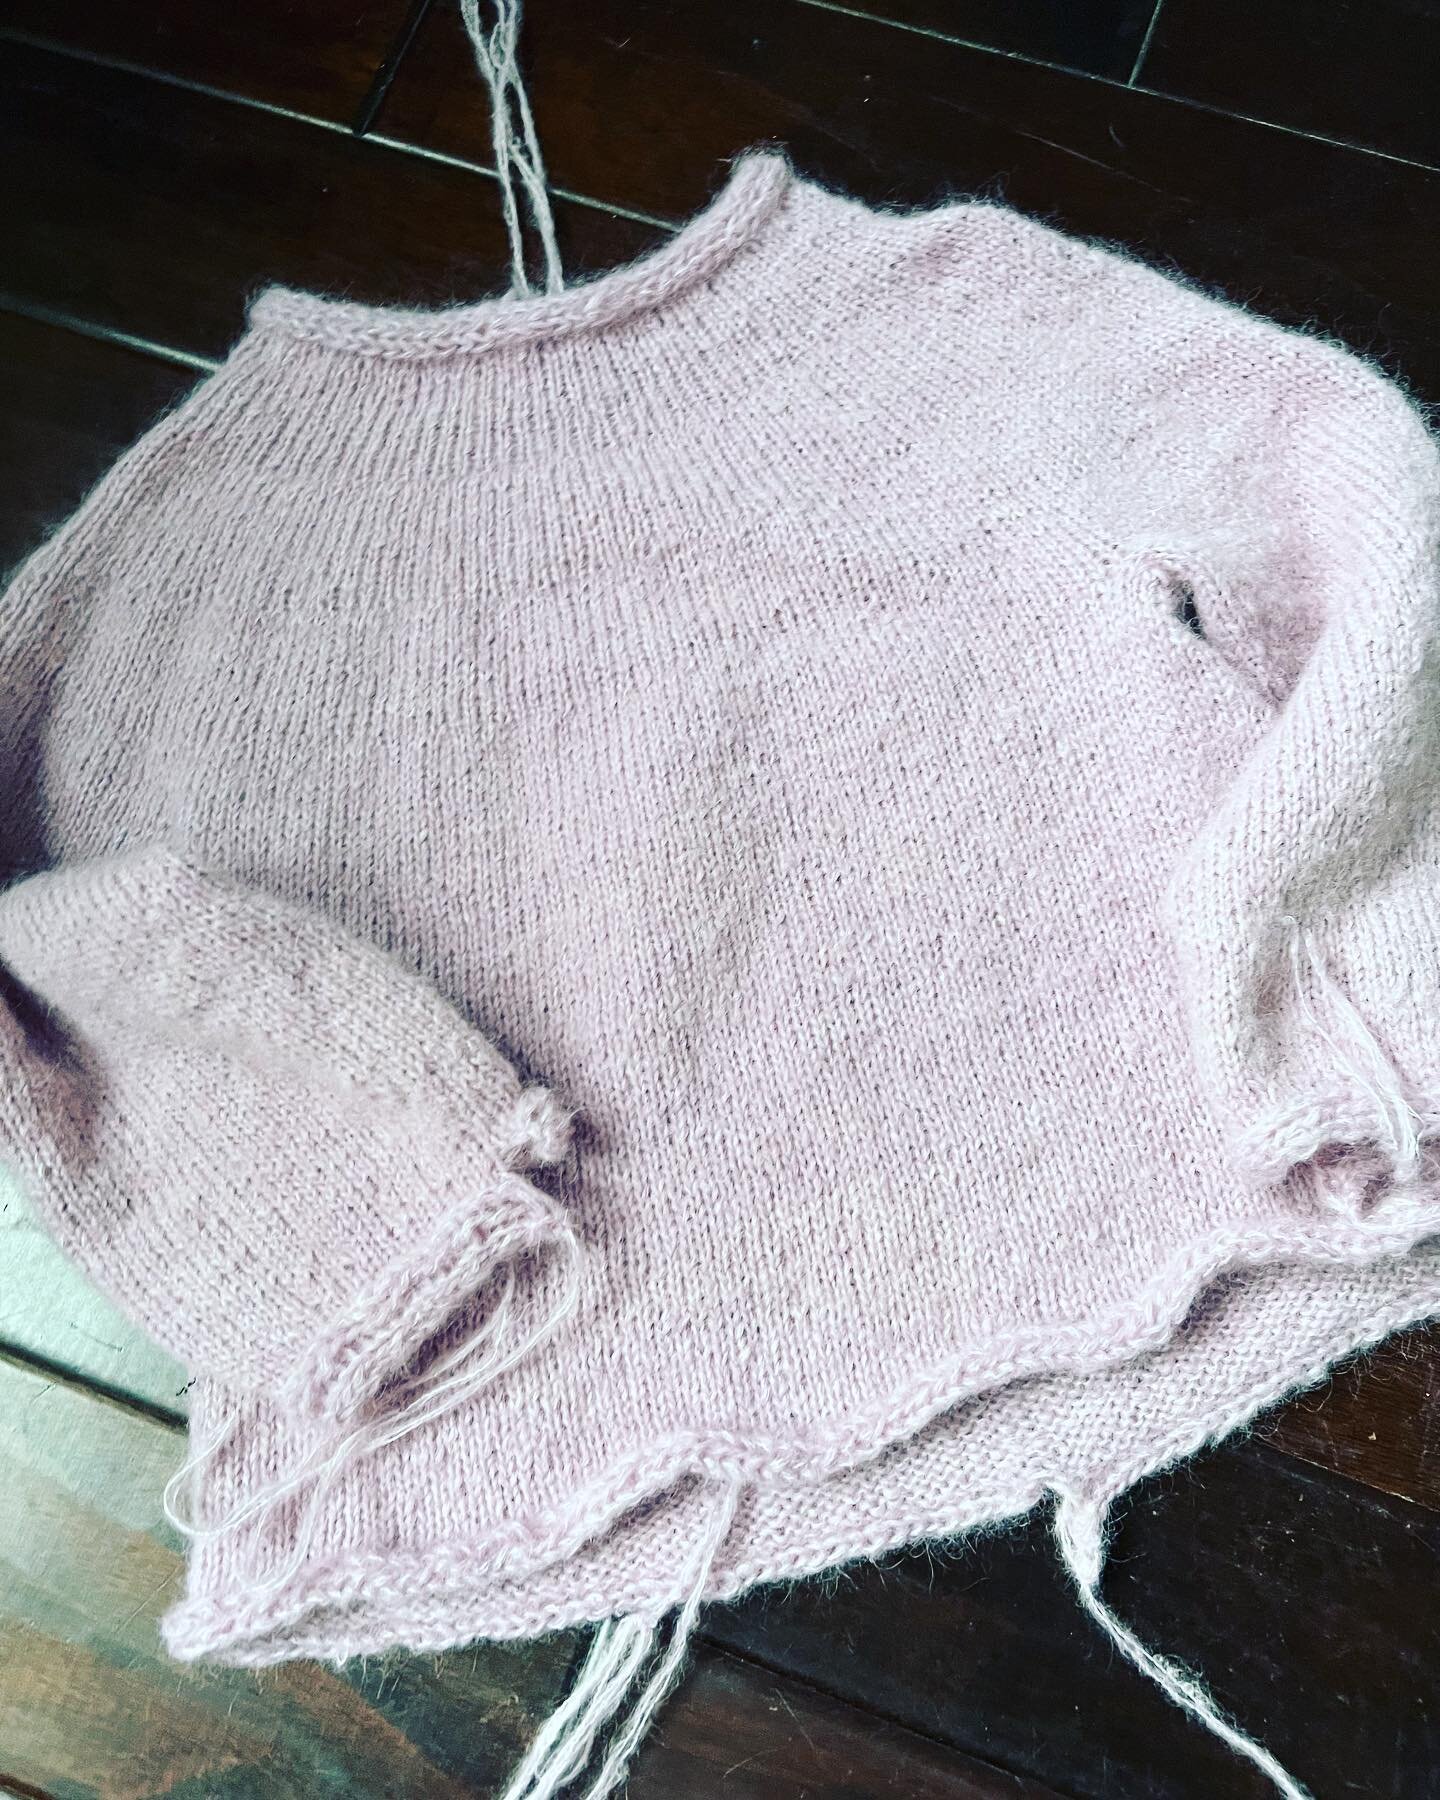 C&rsquo;est fini! 
Well, you know, minus the whole weaving in ends, washing and blocking 🤣 but, still! It&rsquo;s knit 🧶 💖

It has been such a joy to have this project to work on when I just needed something to still my mind and help me find balan